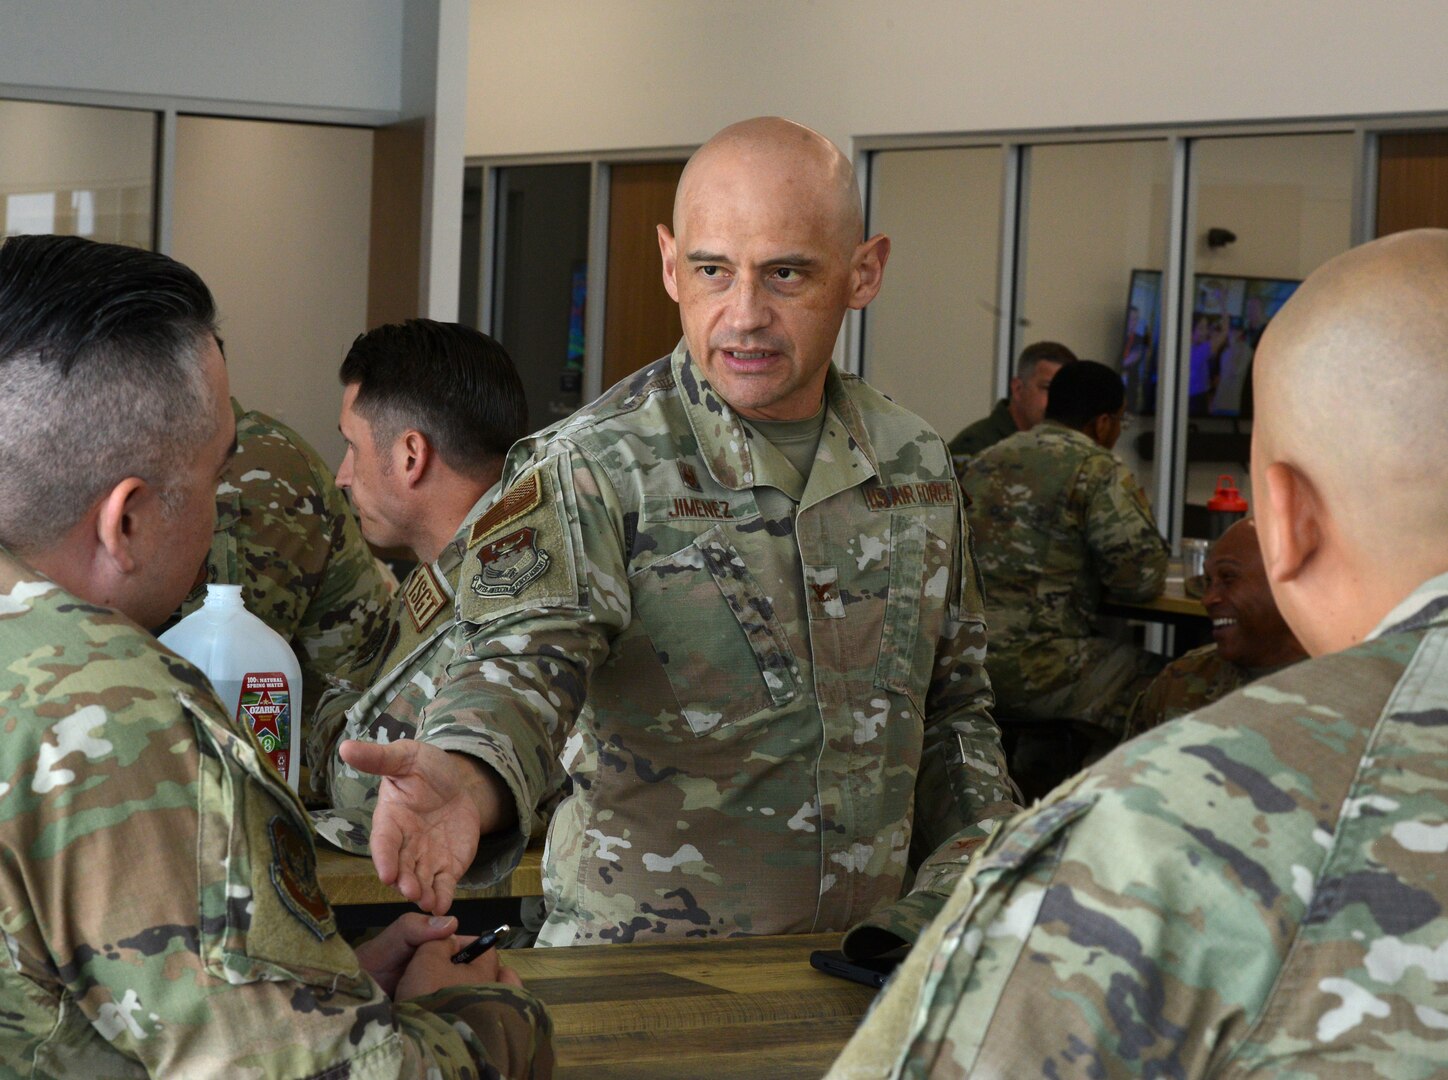 Col. Jose Jimenez, Inter-American Air Forces Academy commandant, offers personal advice during a speed-mentoring session, Friday, at Joint Base San Antonio-Kelly.